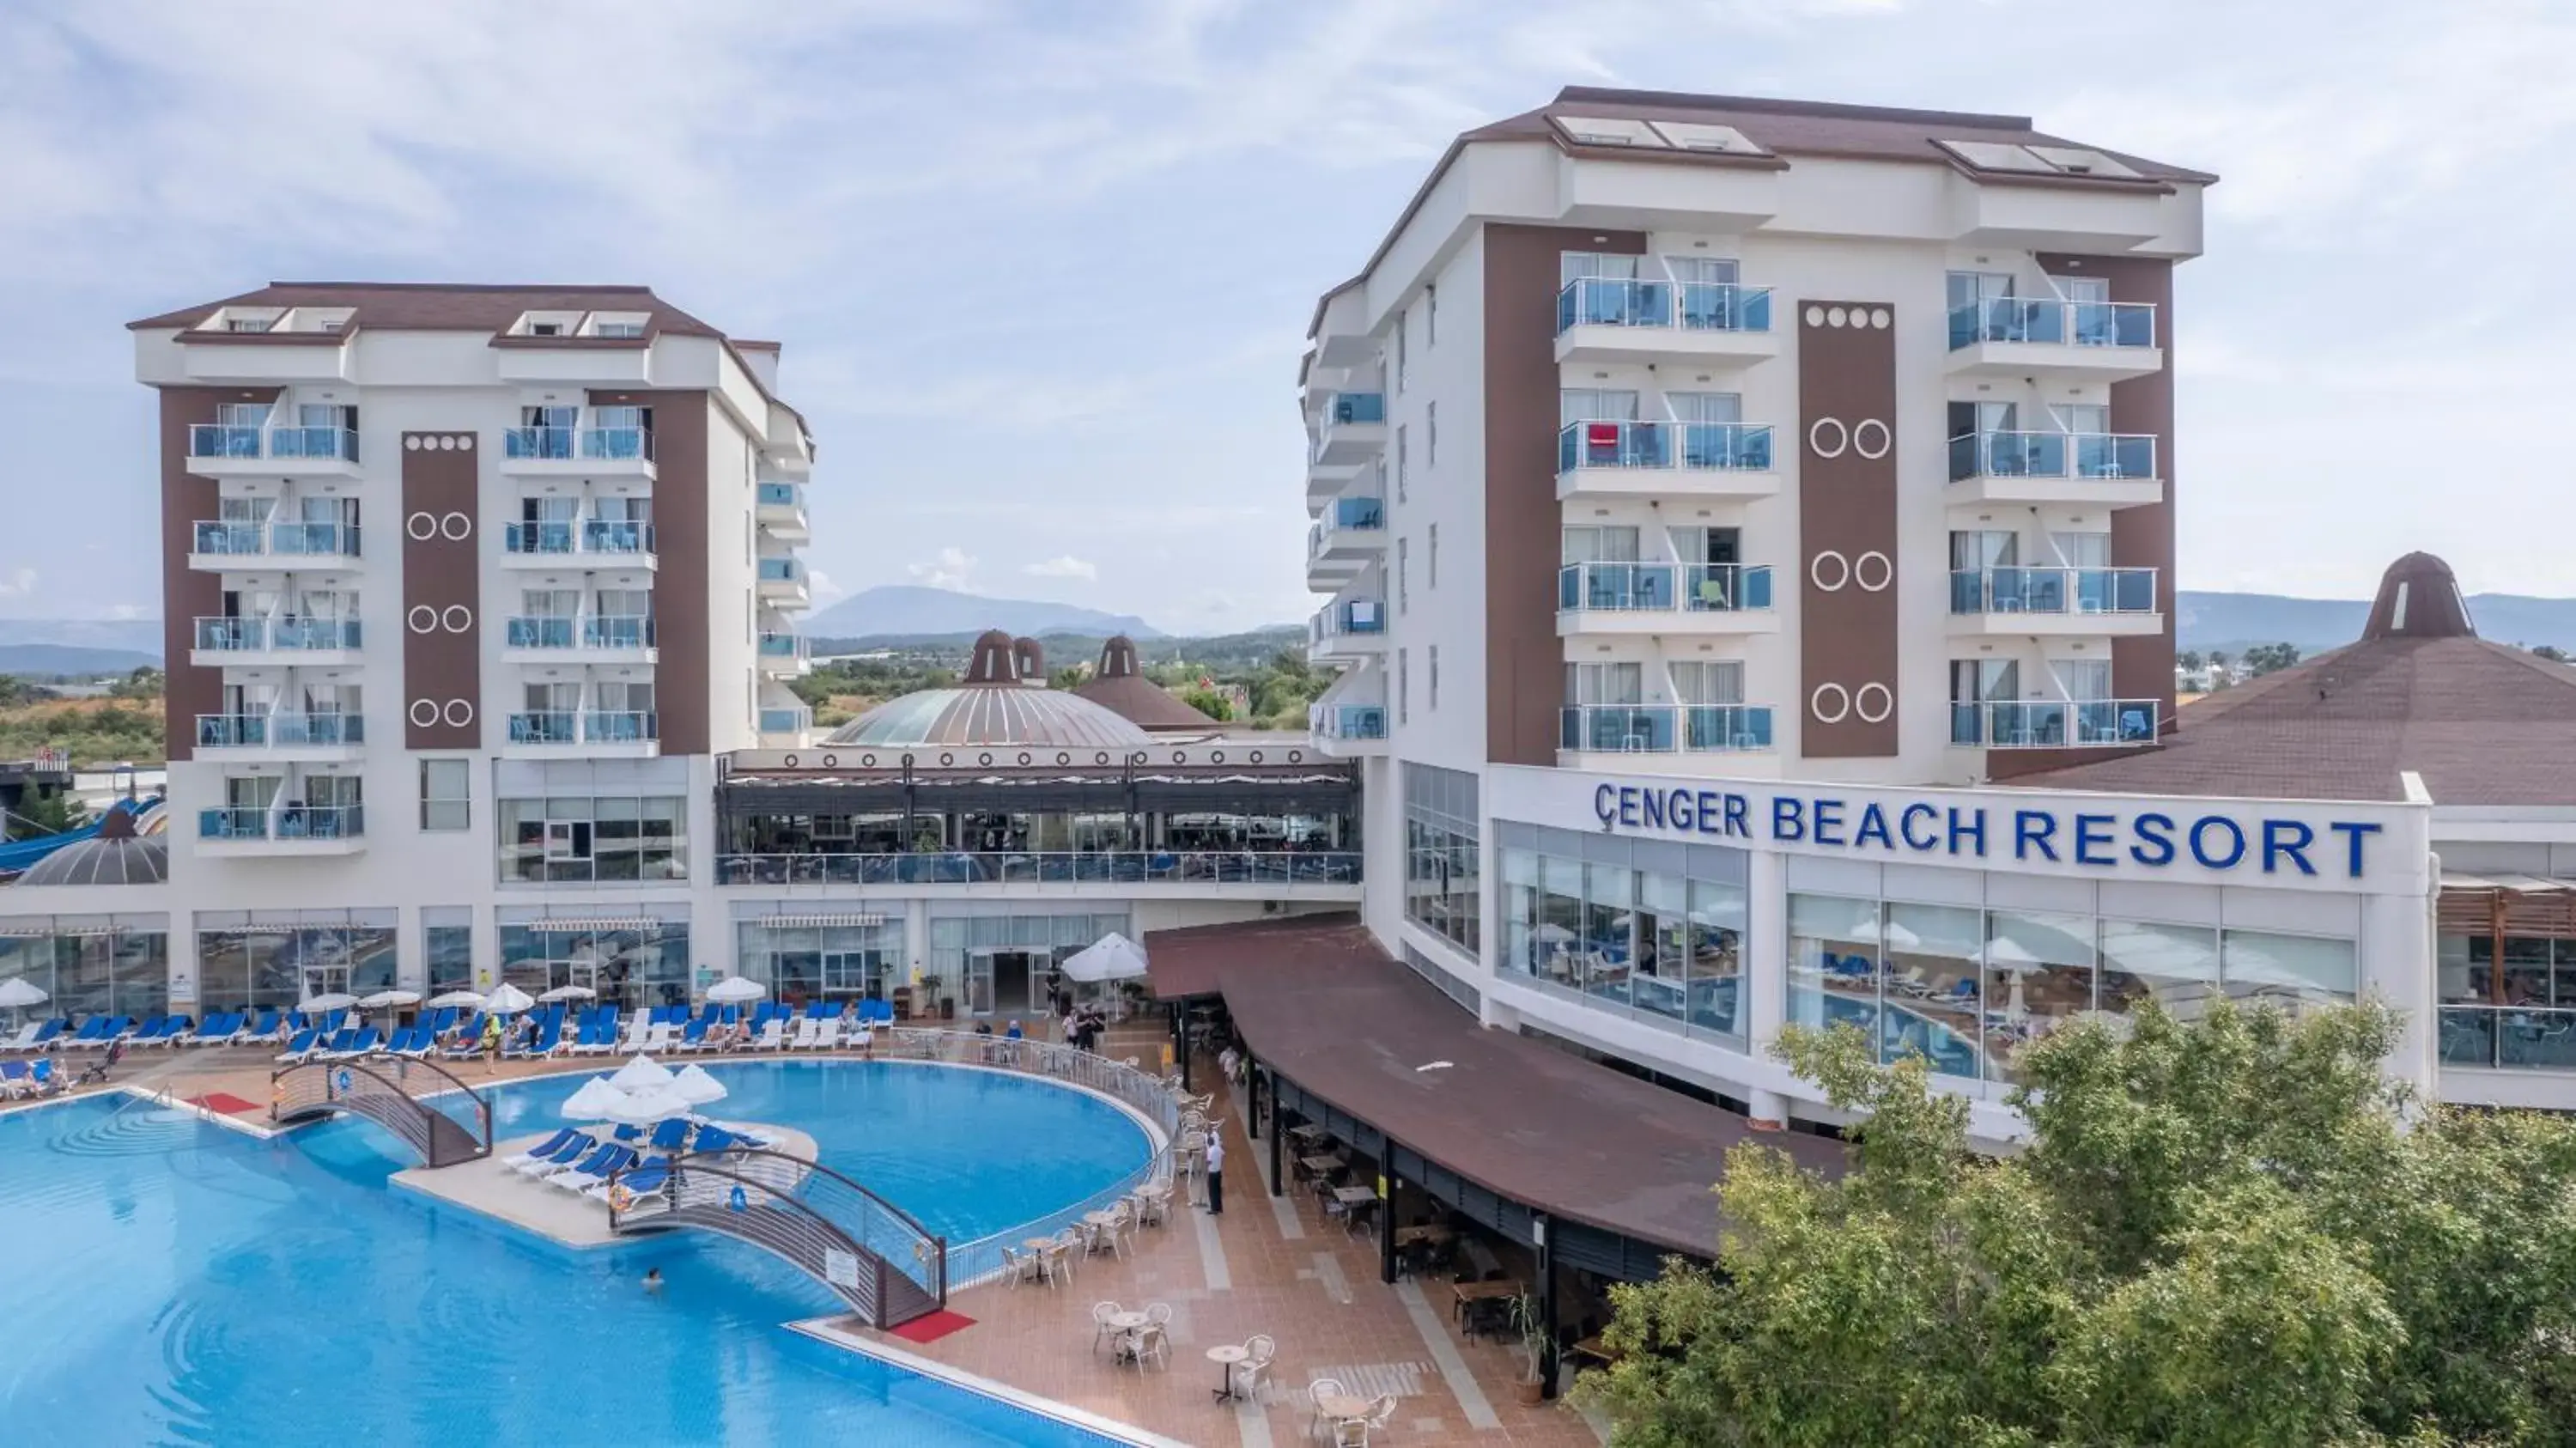 Property building, Pool View in Cenger Beach Resort Spa - All Inclusive